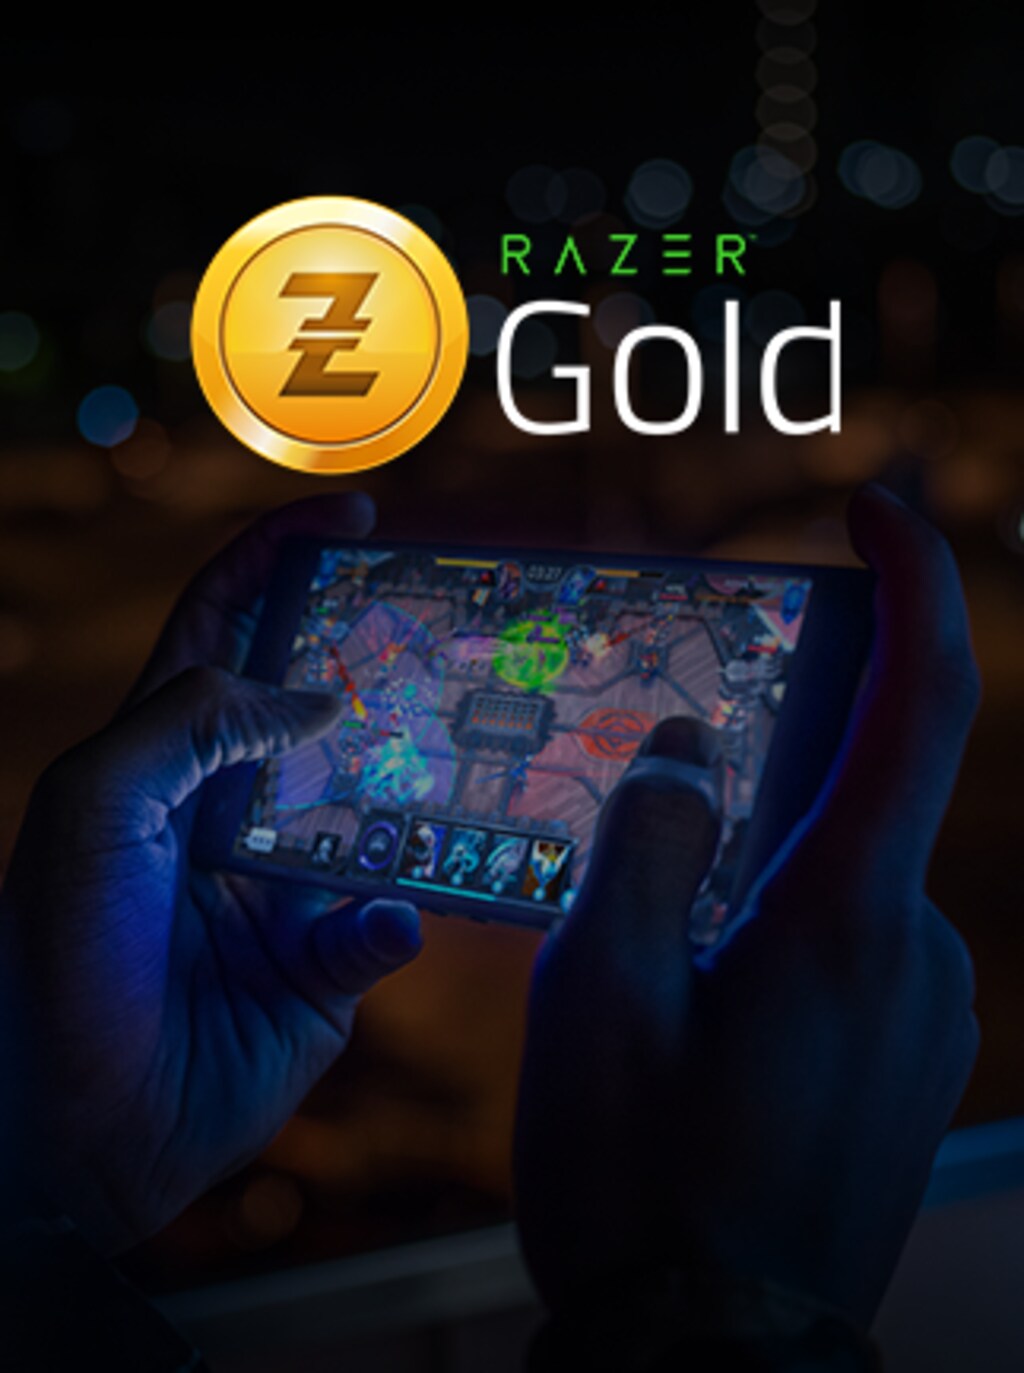 Razer Gold Cards: The Ultimate Way to Pay for Gaming Content